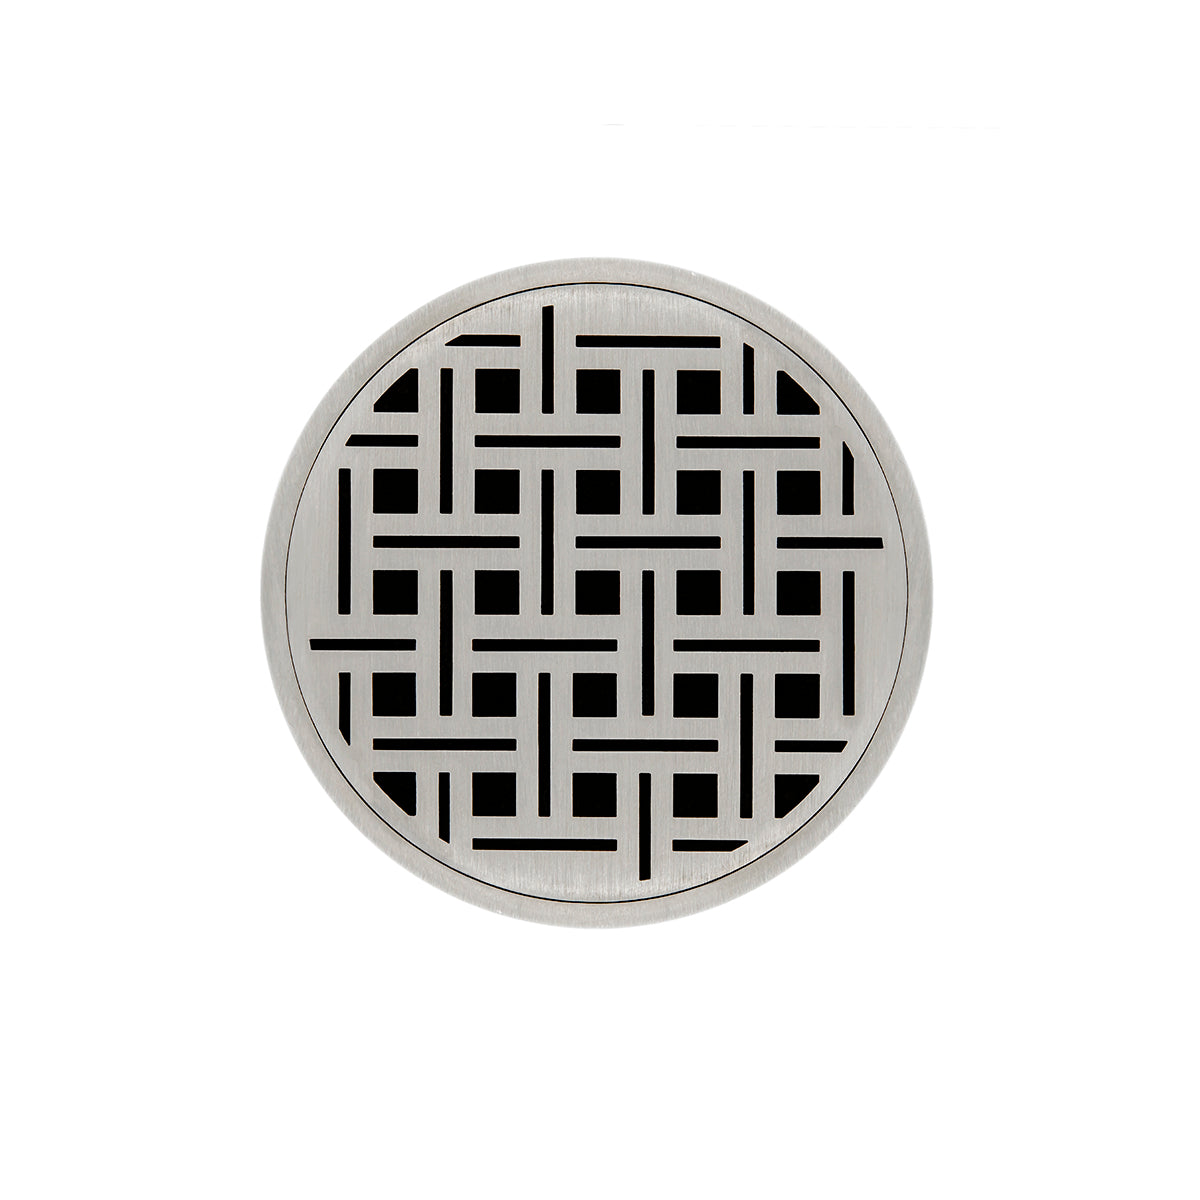 Infinity Drain 5" Round RVD 5 Premium Center Drain Kit with Weave Pattern Decorative Plate with ABS Drain Body, 2" Outlet